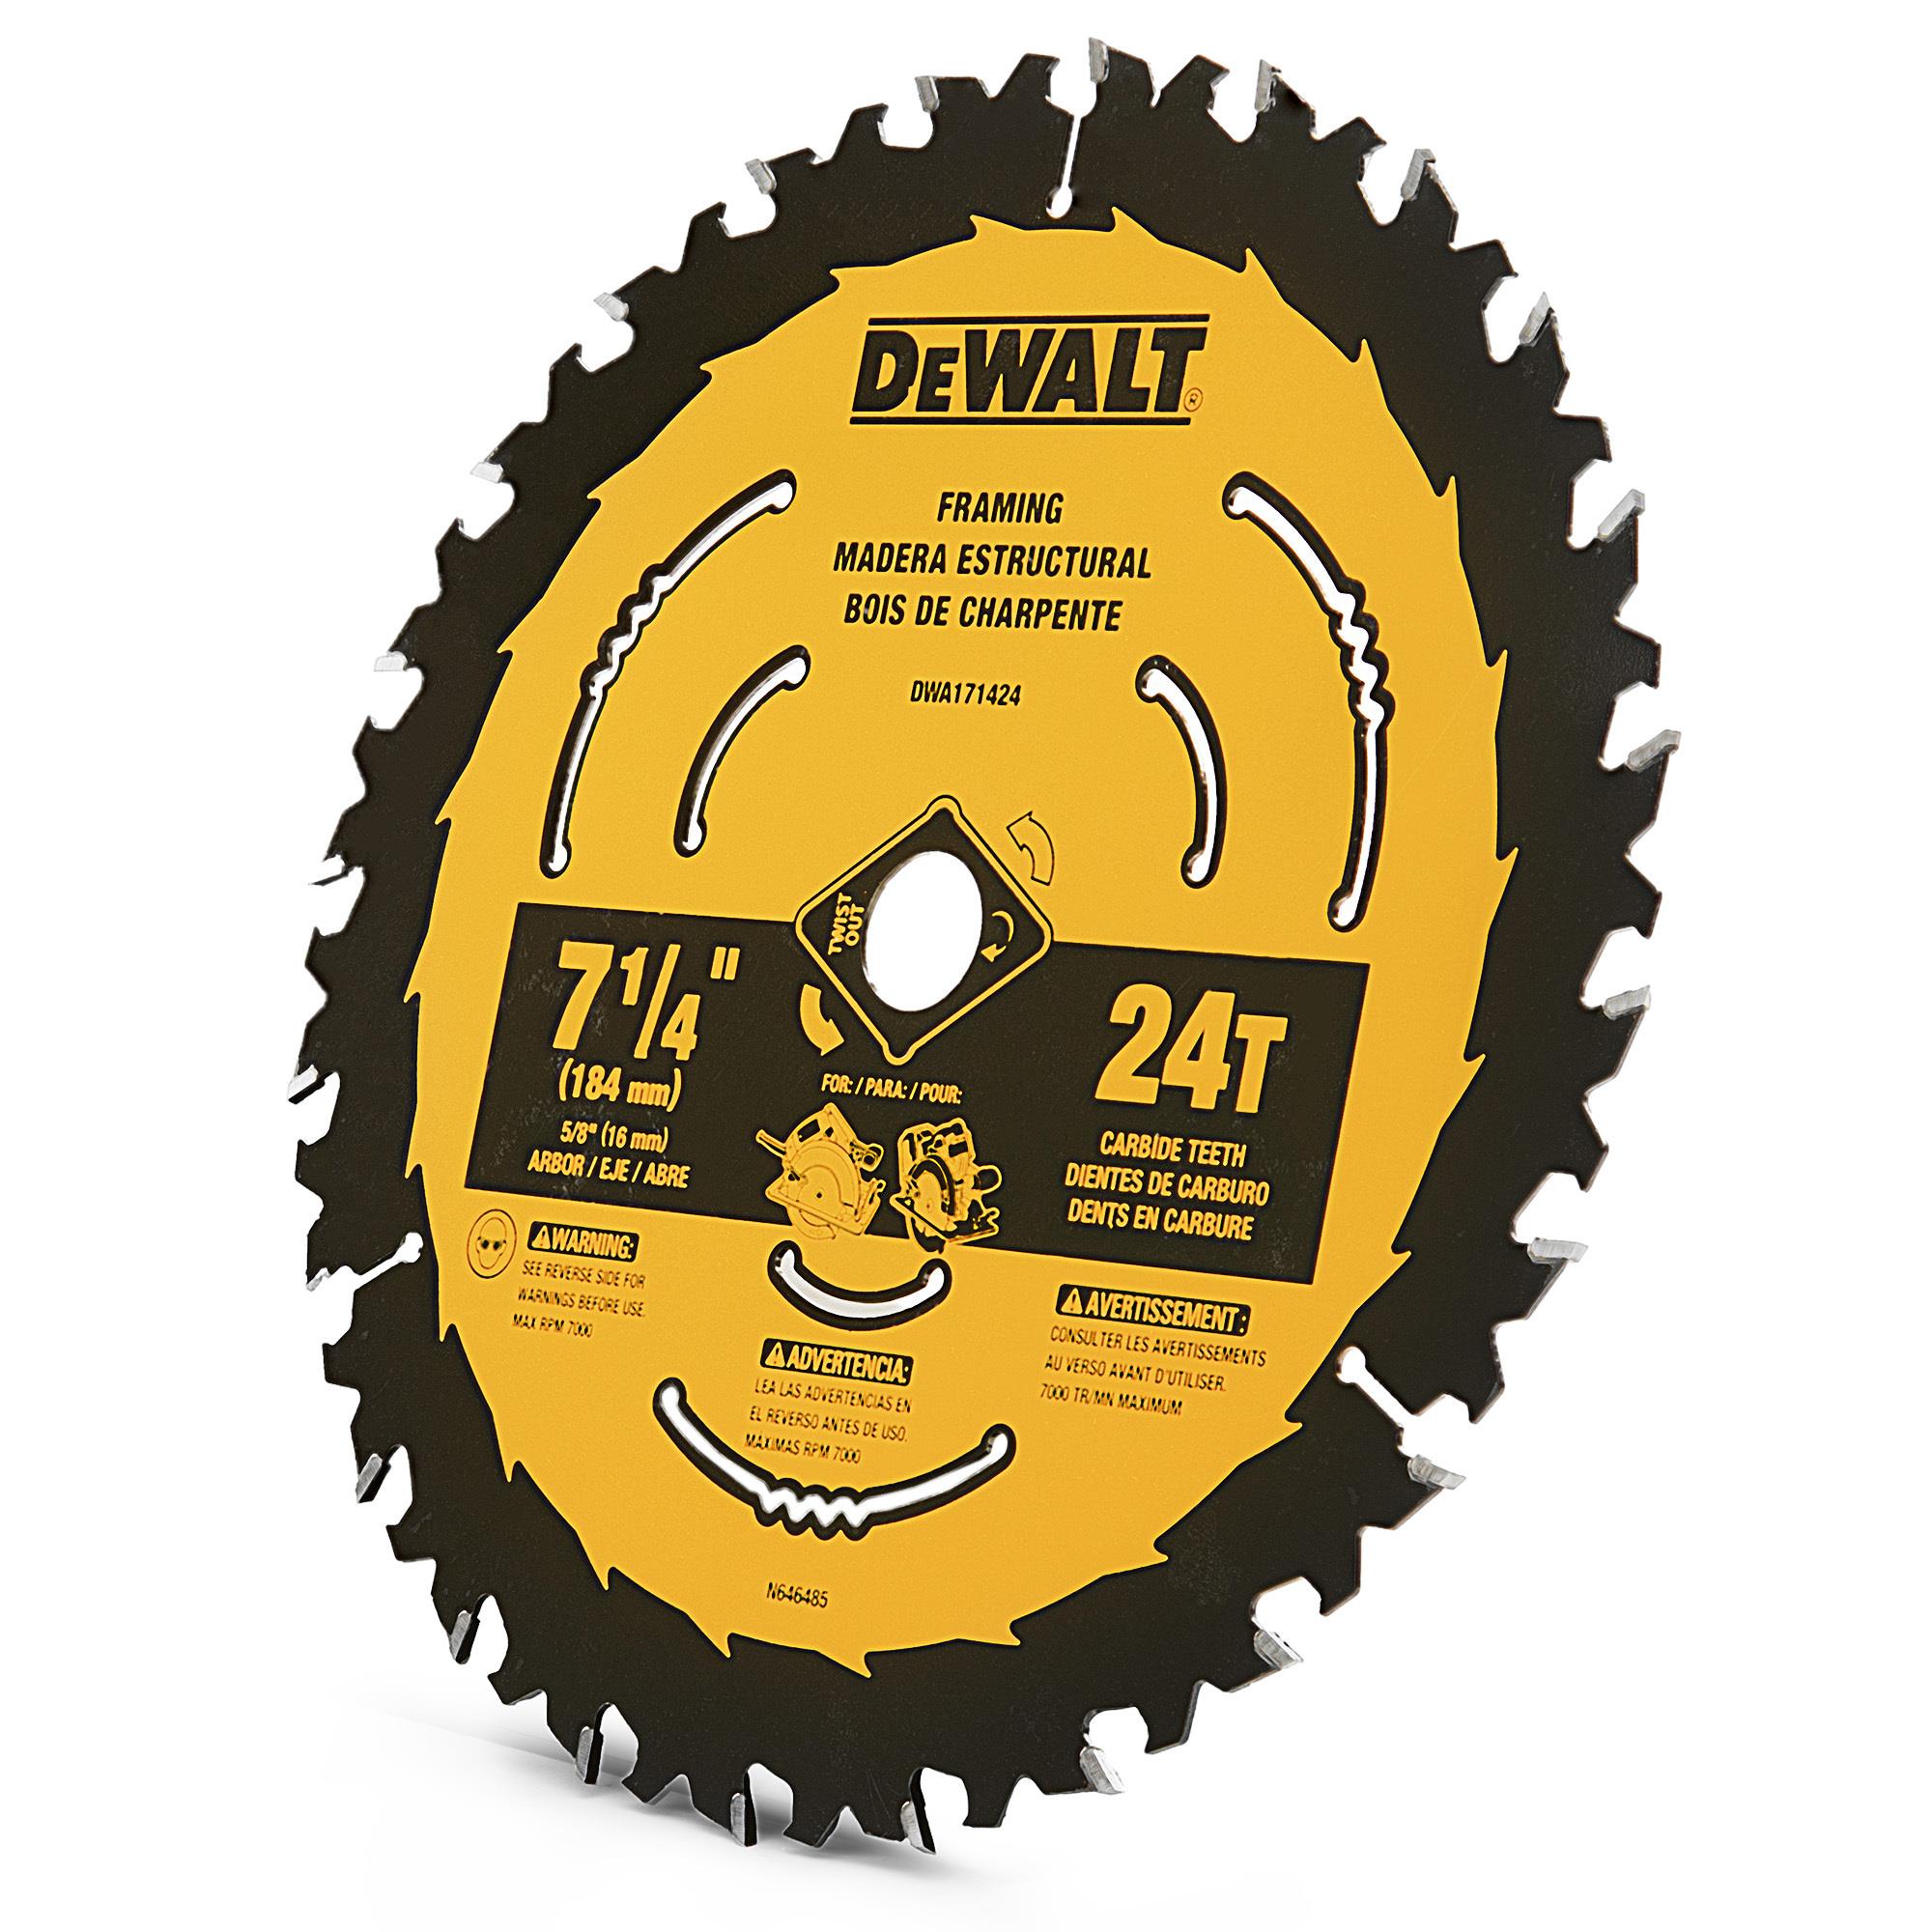 DeWalt DCS578X1 Circular Saw Kit, 60-Volt Max, Electric Brake, 5,800 RPM,  7-1/4-In., With Battery, Charger, Quantity